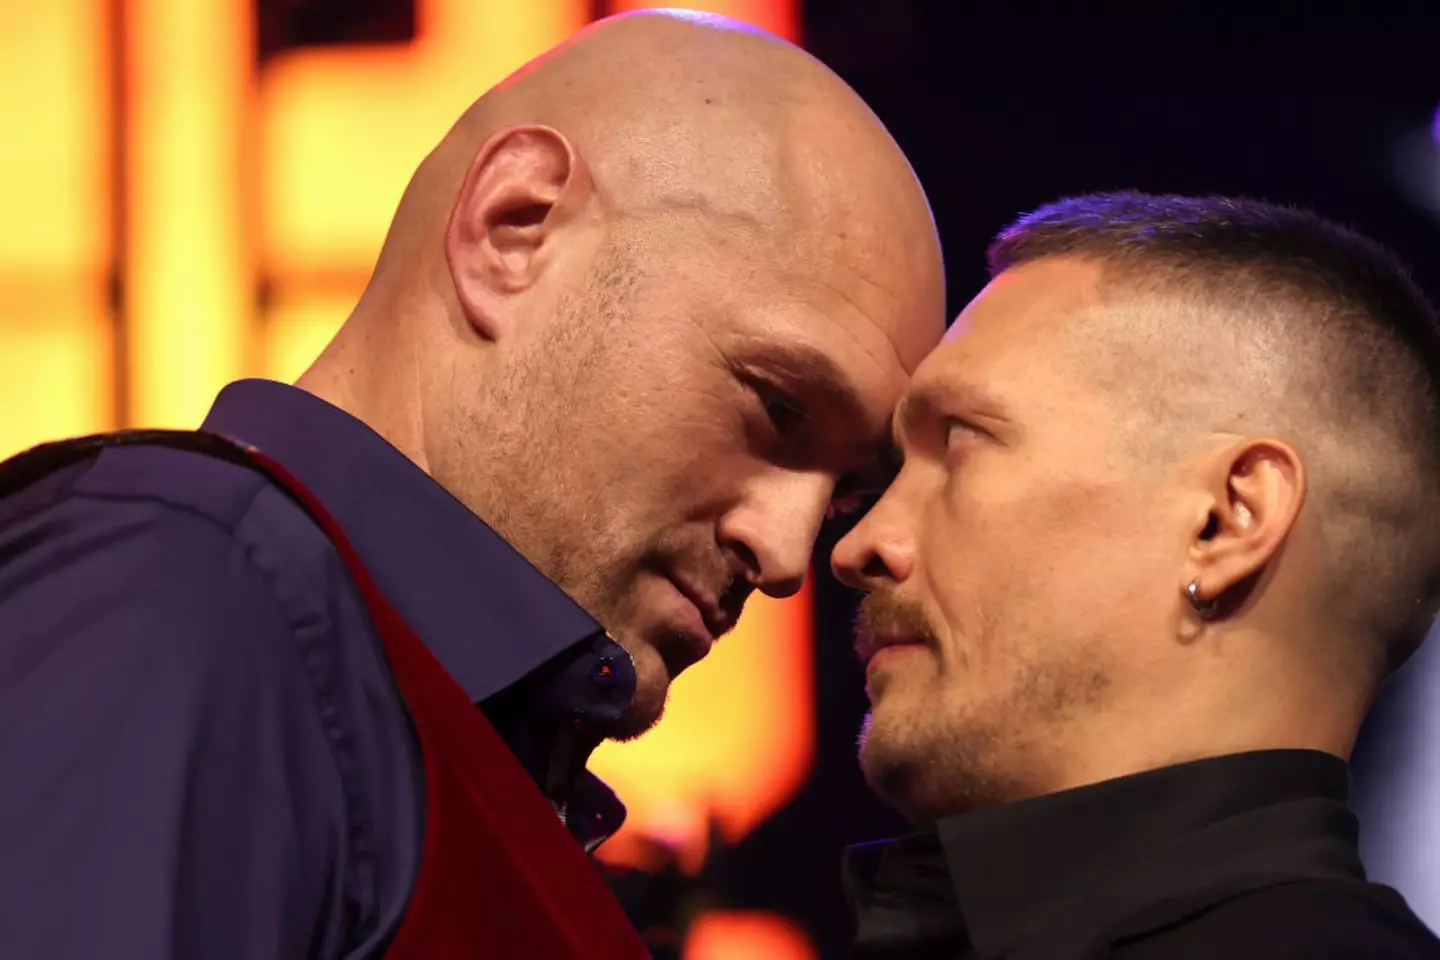 Fury and Usyk faced off in their press conference for the 'Ring of Fire'.